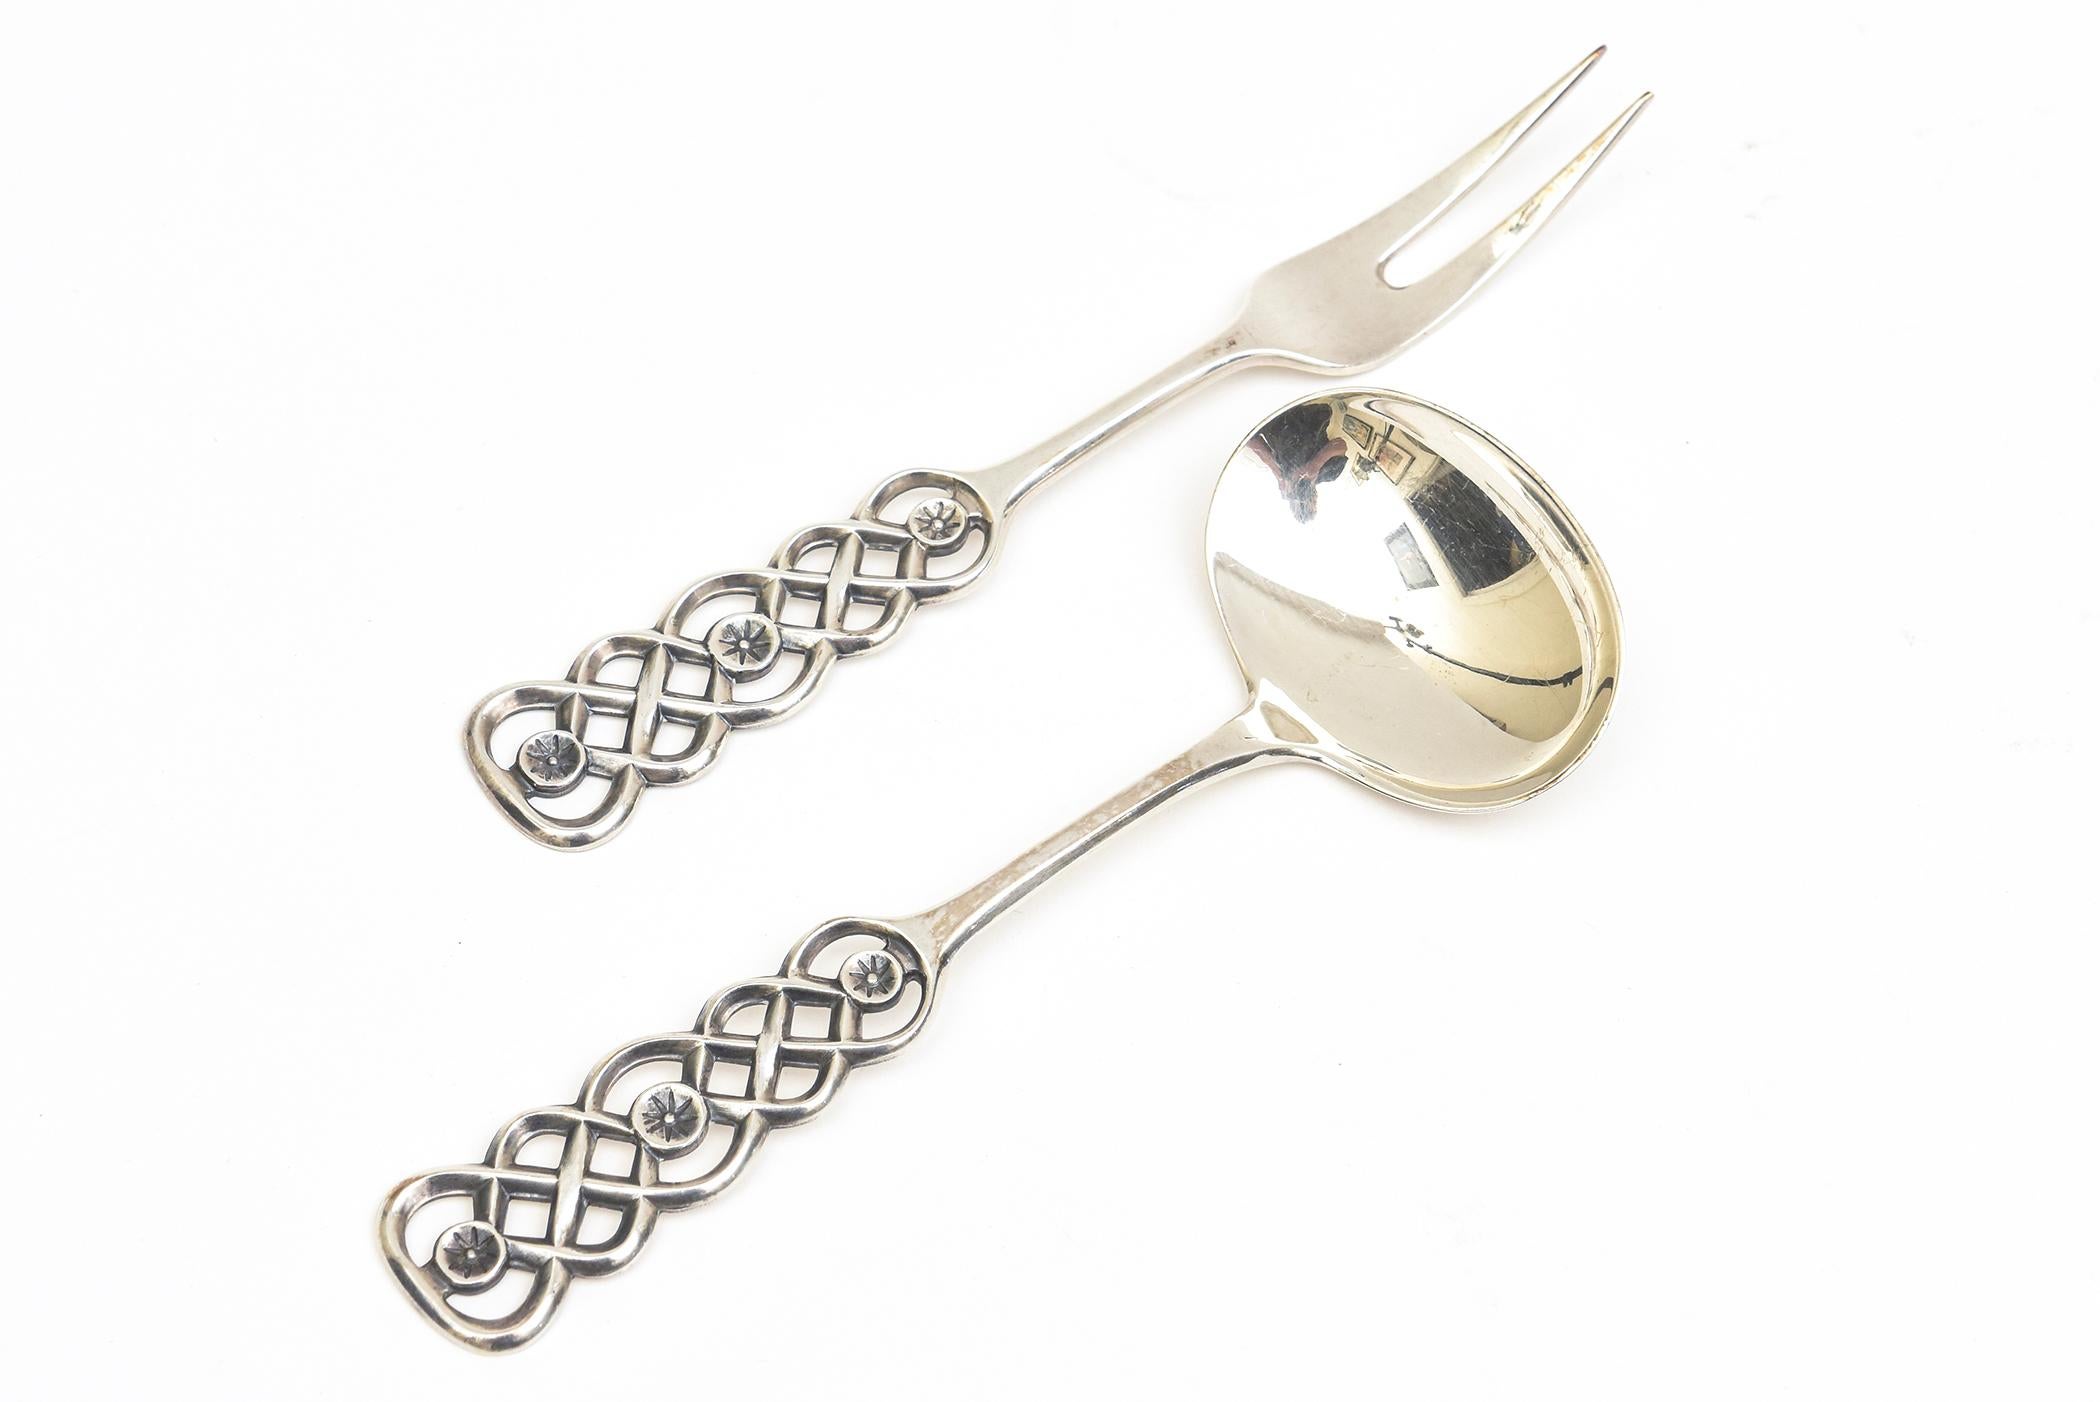 This sculptural set of 2 vintage sterling silver stunning serving pieces by the Norwegian artist David Anderson are early works of his and are for serving condiments. One is a pickle fork and the other a relish spoon. it is from the Ringbu pattern